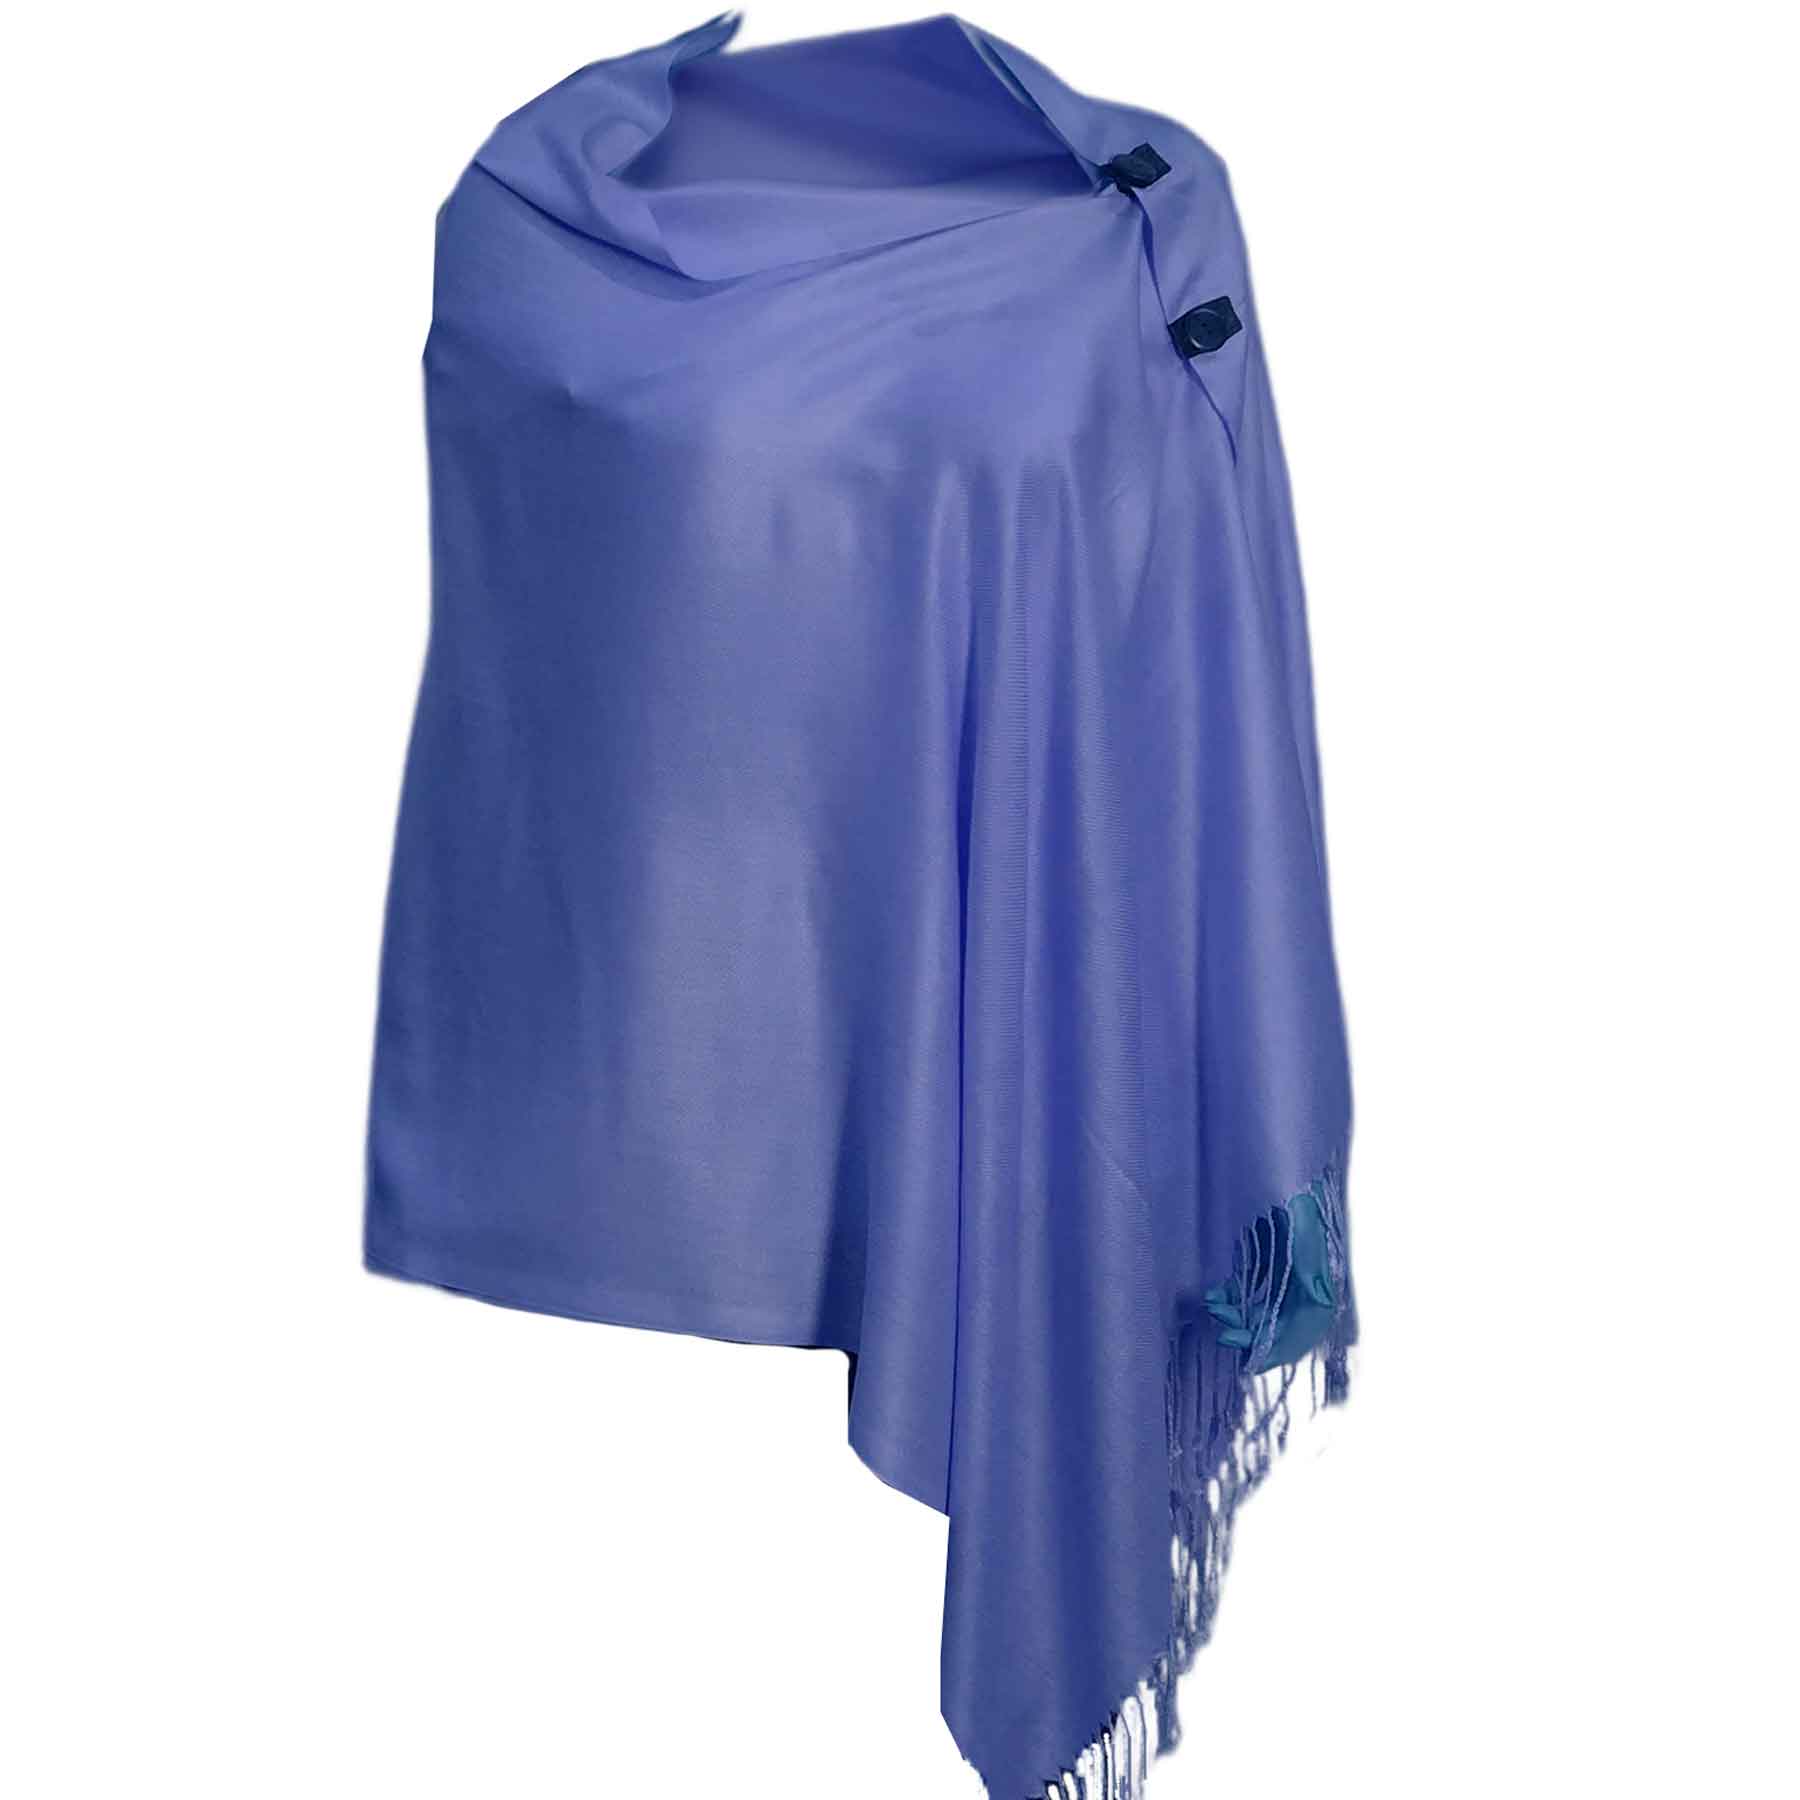 3866 - Pashmina Style Solid Color Button Shawls 3109 - Solid Spring Green<br>
Pashmina Style Button Shawl - 27